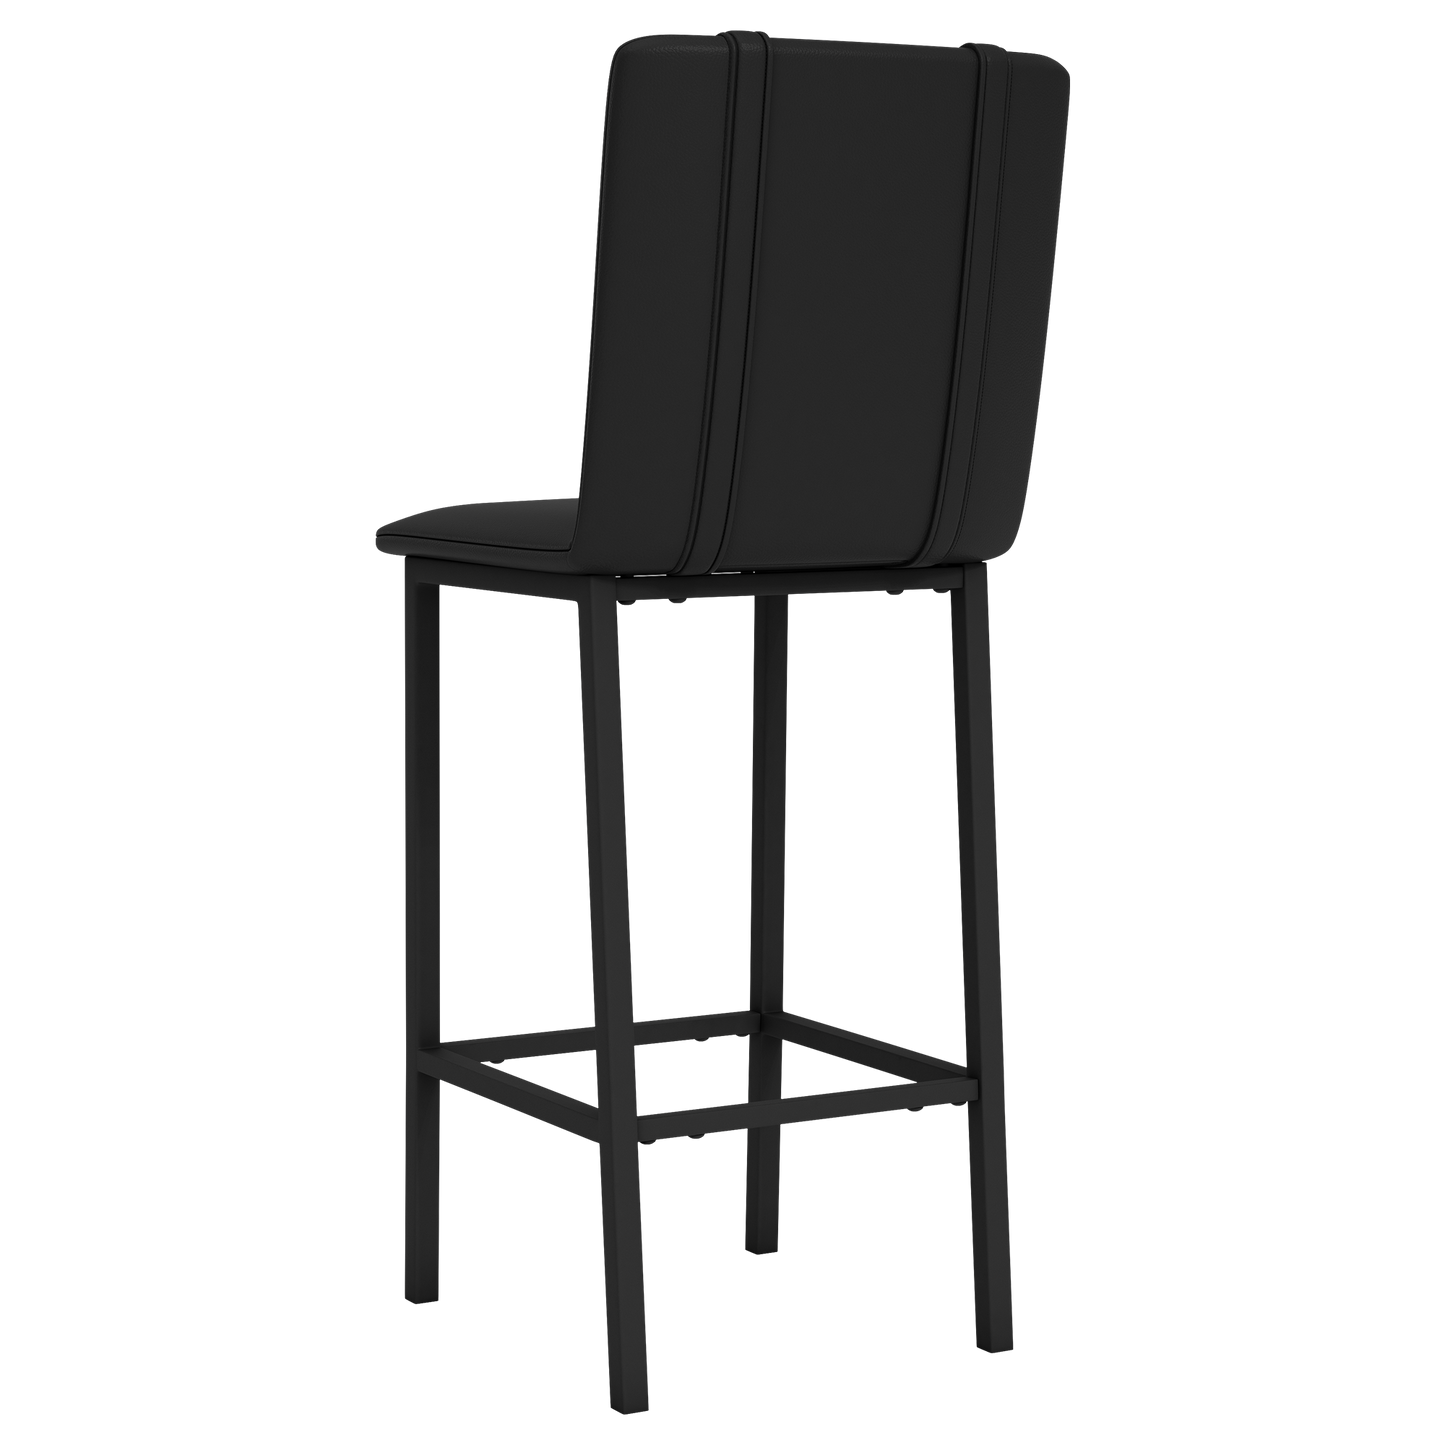 Bar Stool 500 with Minnesota Twins Cooperstown Set of 2